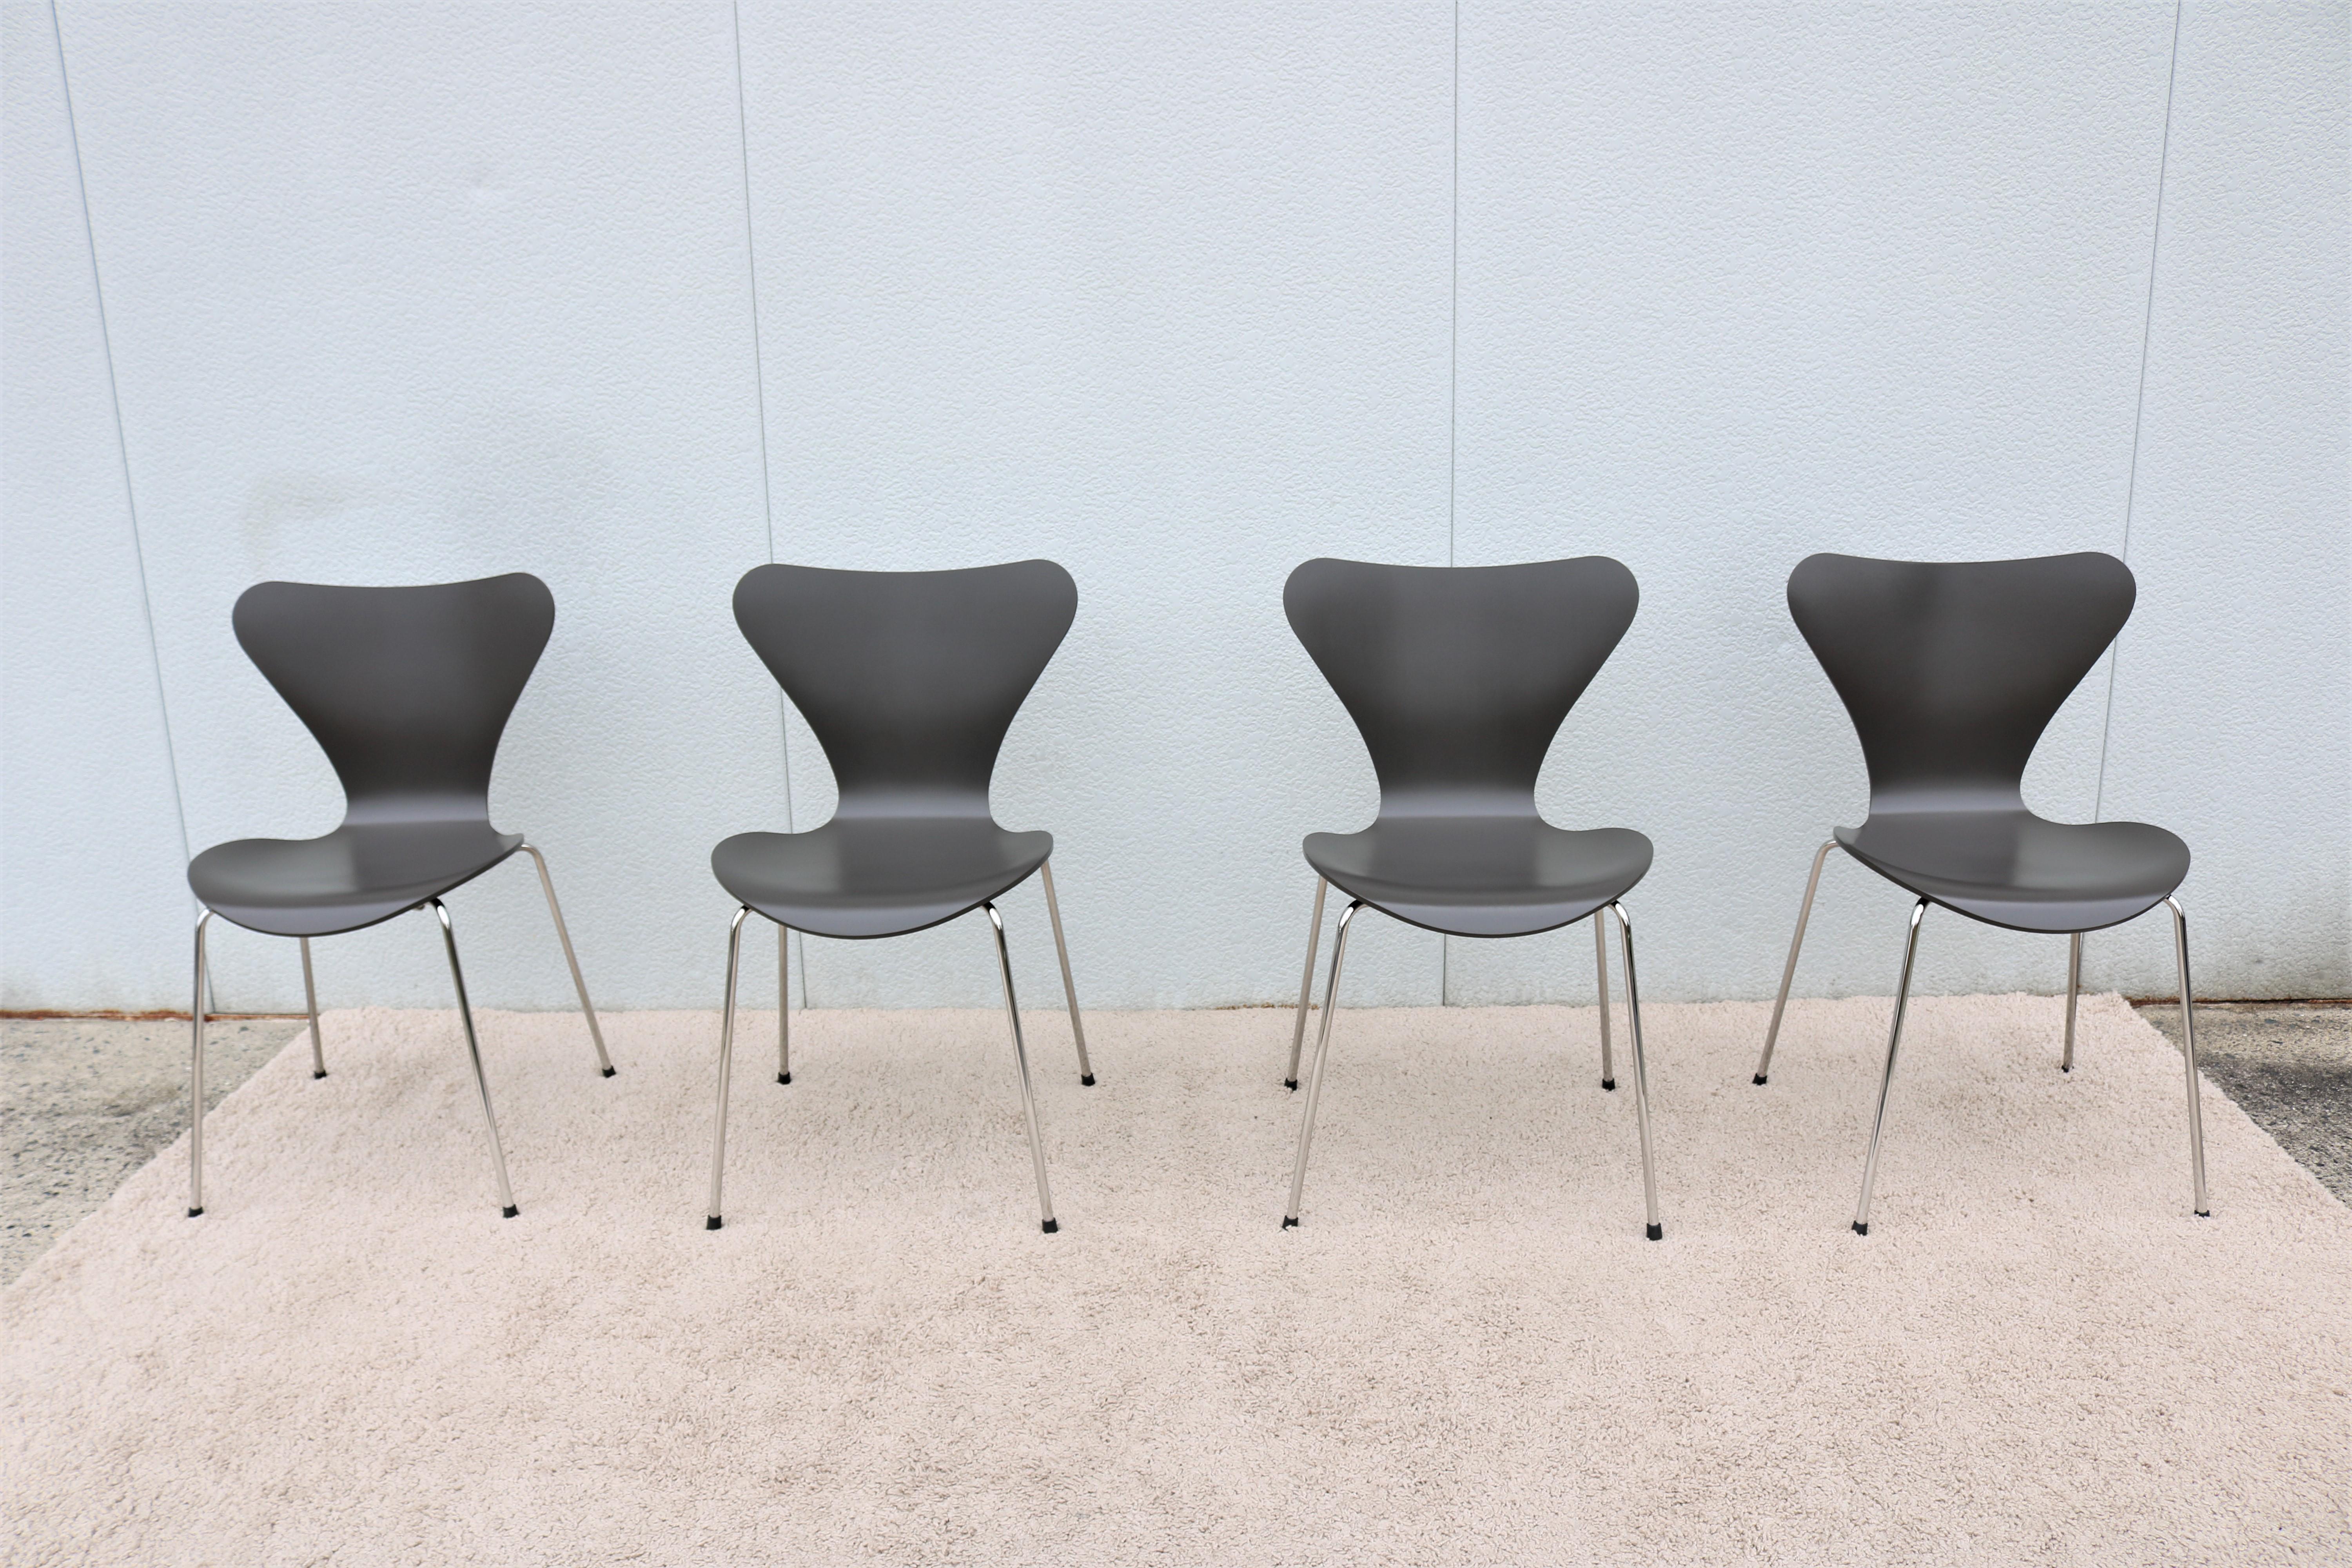 This elegant and Versatile series 7 Chairs was introduced in 1955 by the designer Arne Jacobsen and instantly became an iconic design.
Very comfortable bentwood seat, it is by far the most sold chair in the history of Fritz Hansen.
Looks